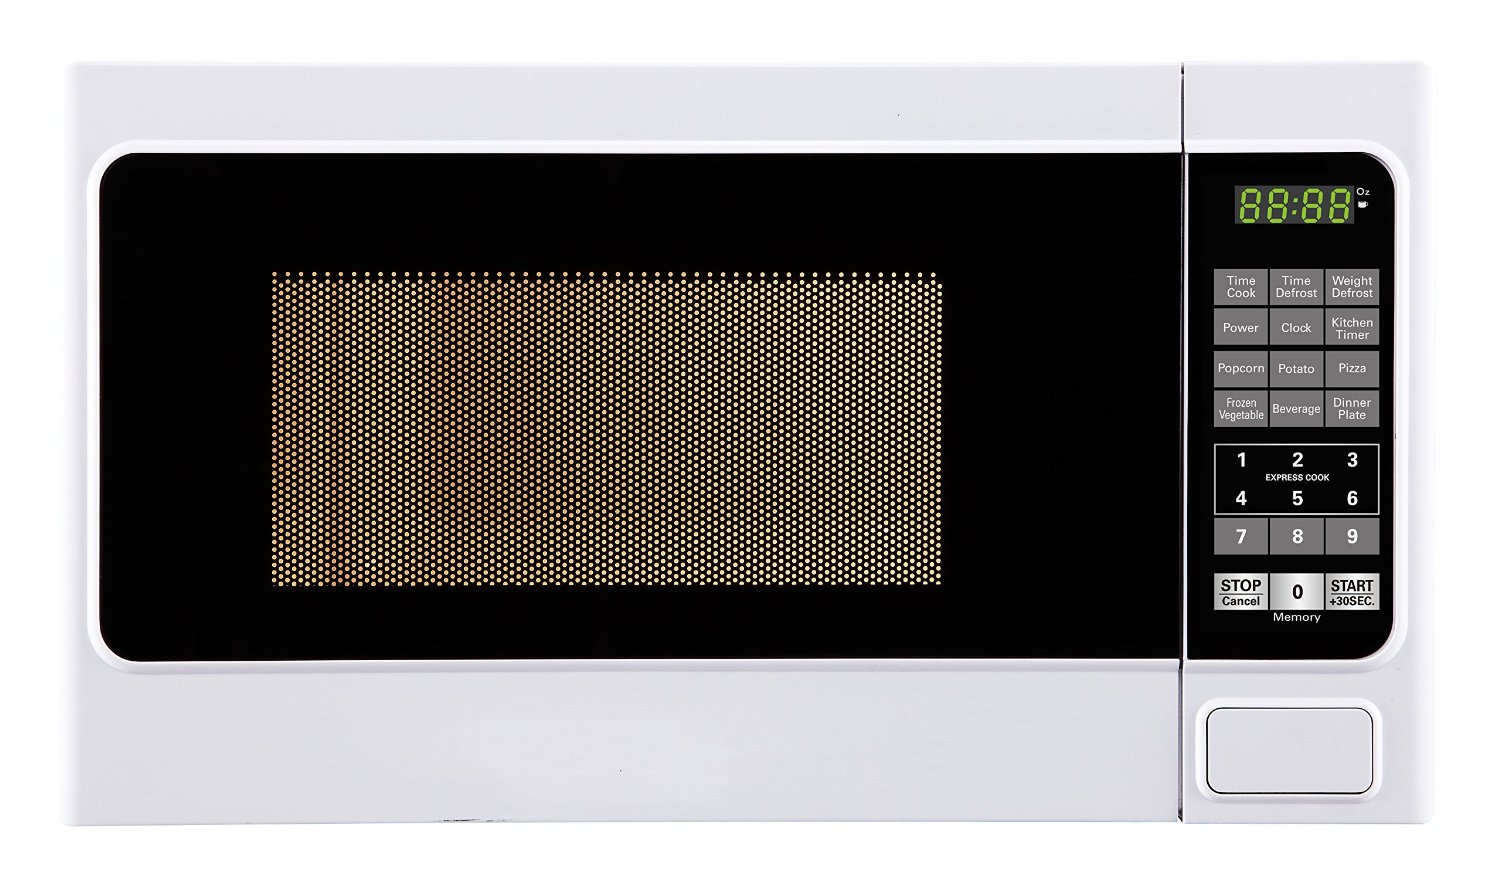 Impecca CM07N2W 700W Power Countertop Microwave Oven, White, 0.7 cu. ft.